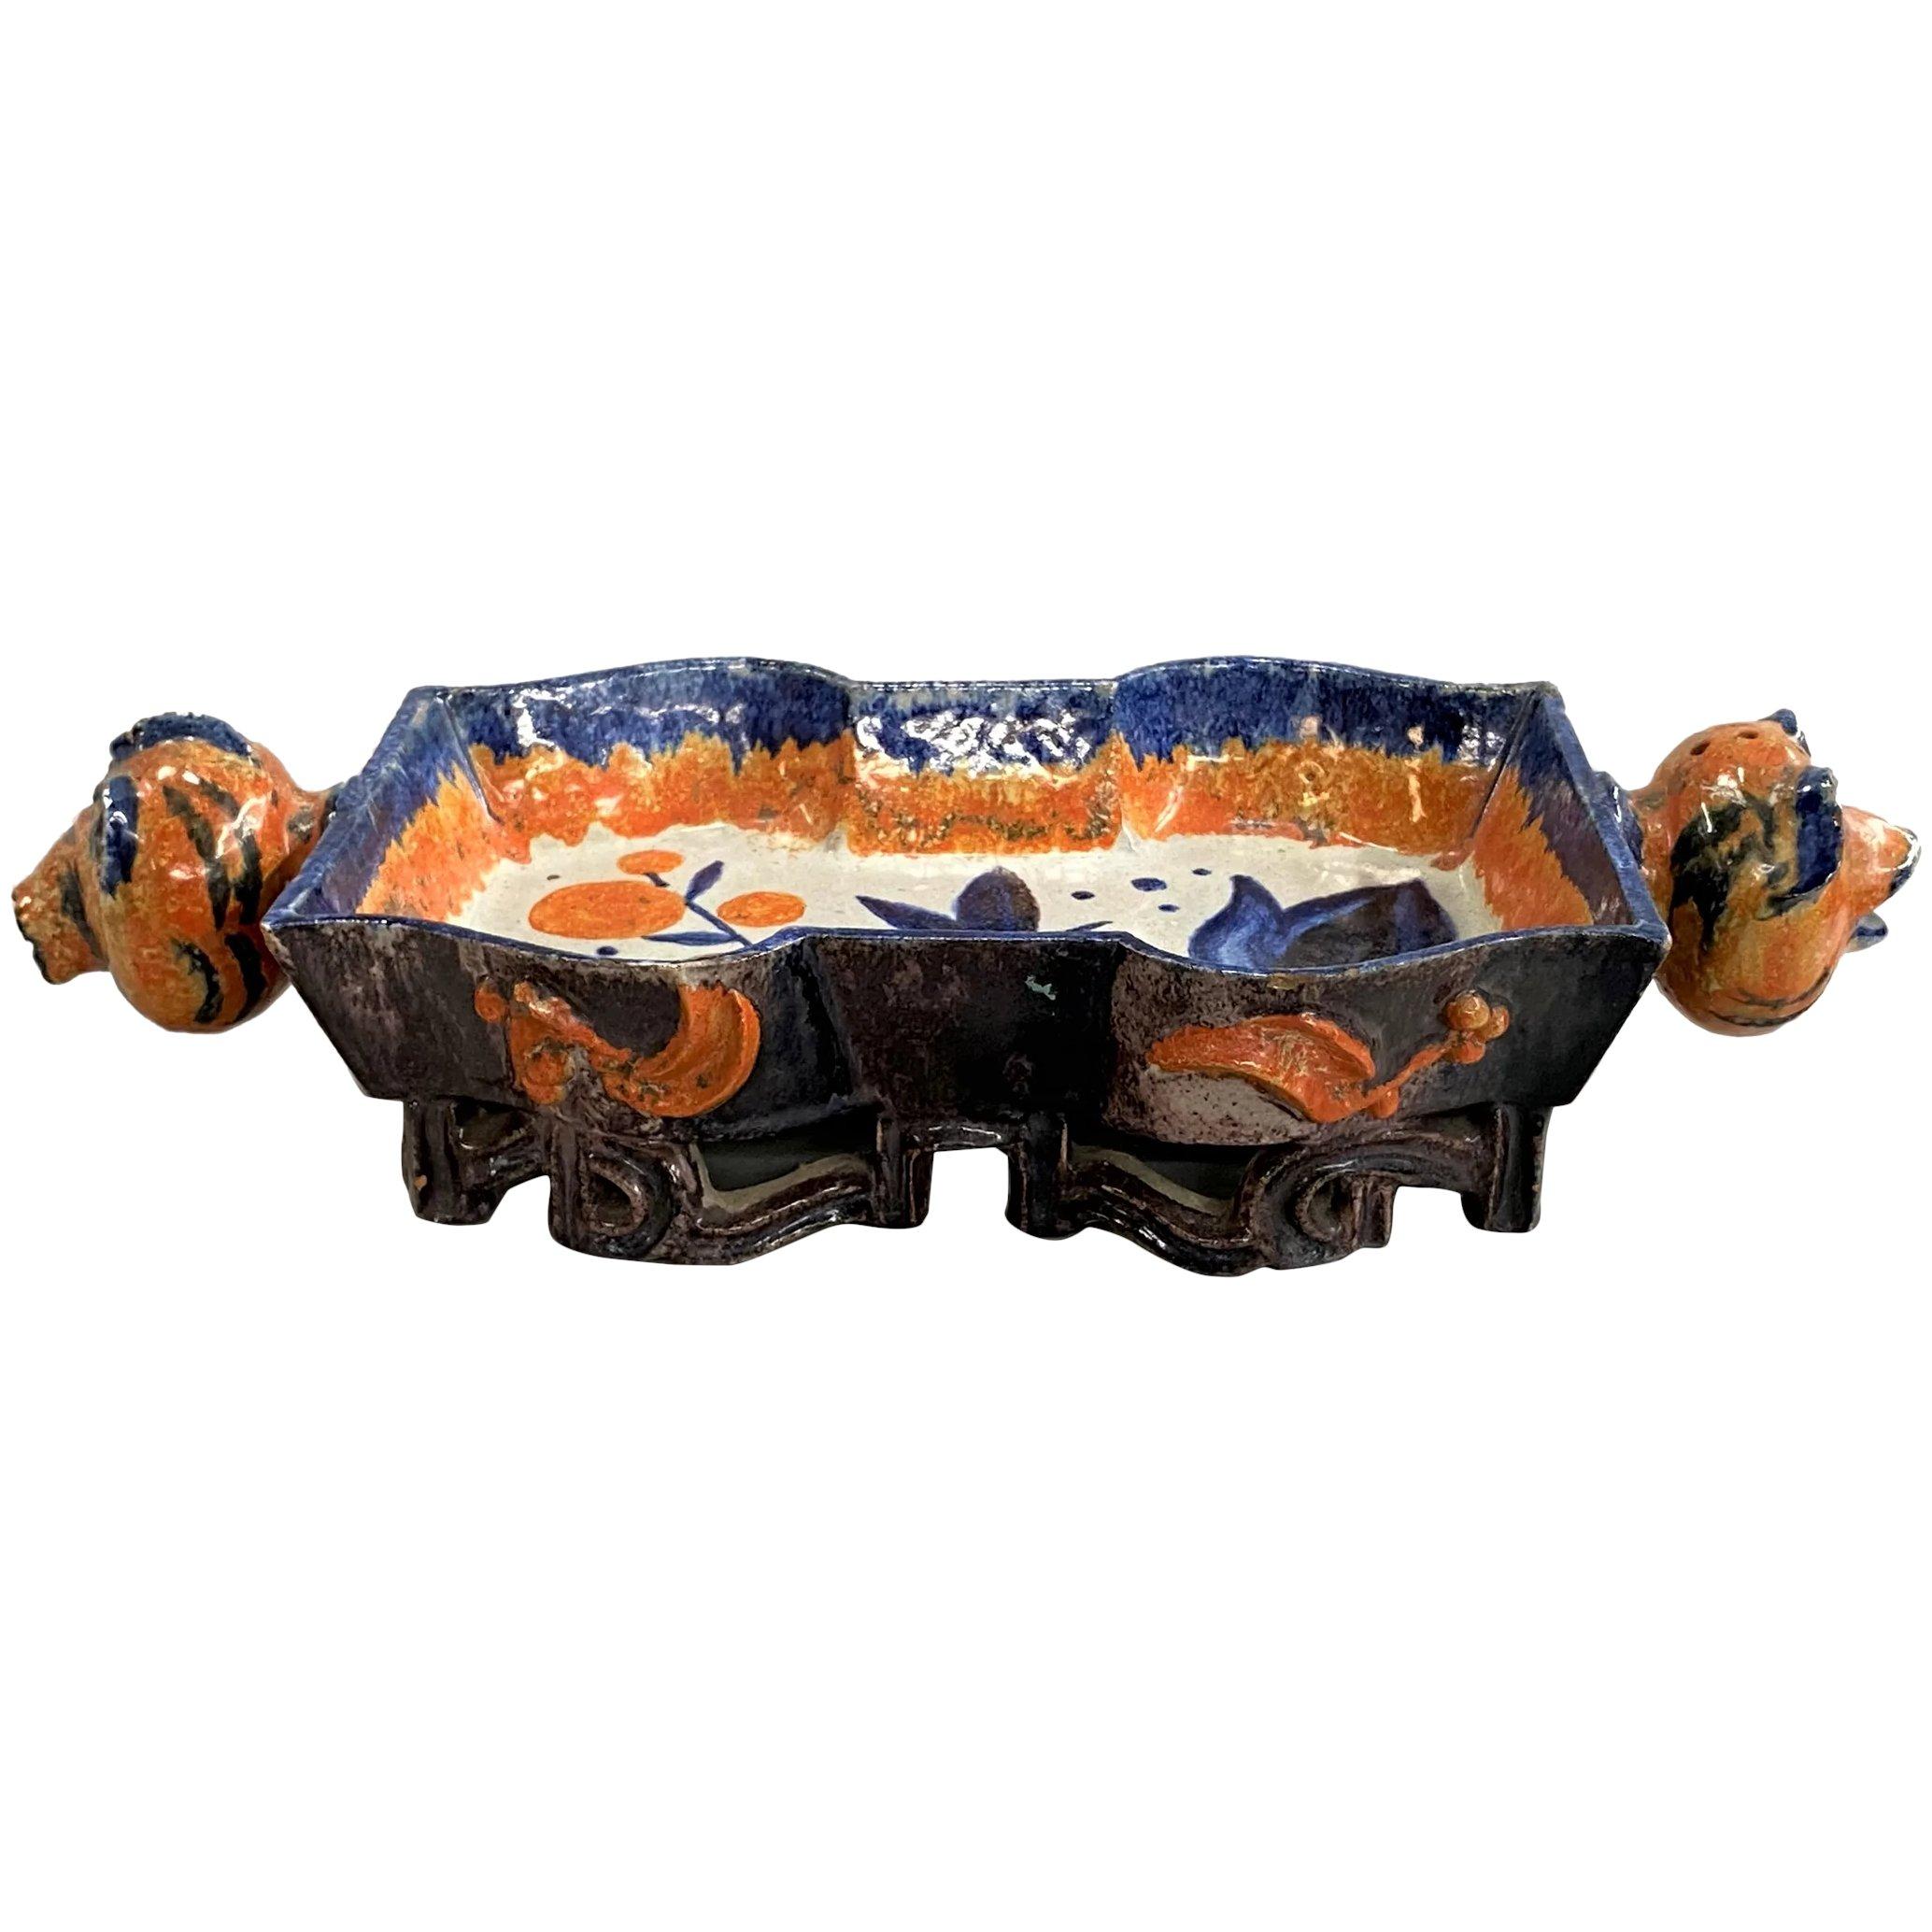 Polychrome Ceramic Centerpiece with Animal Head Handles - Art by Vally Wieselthier